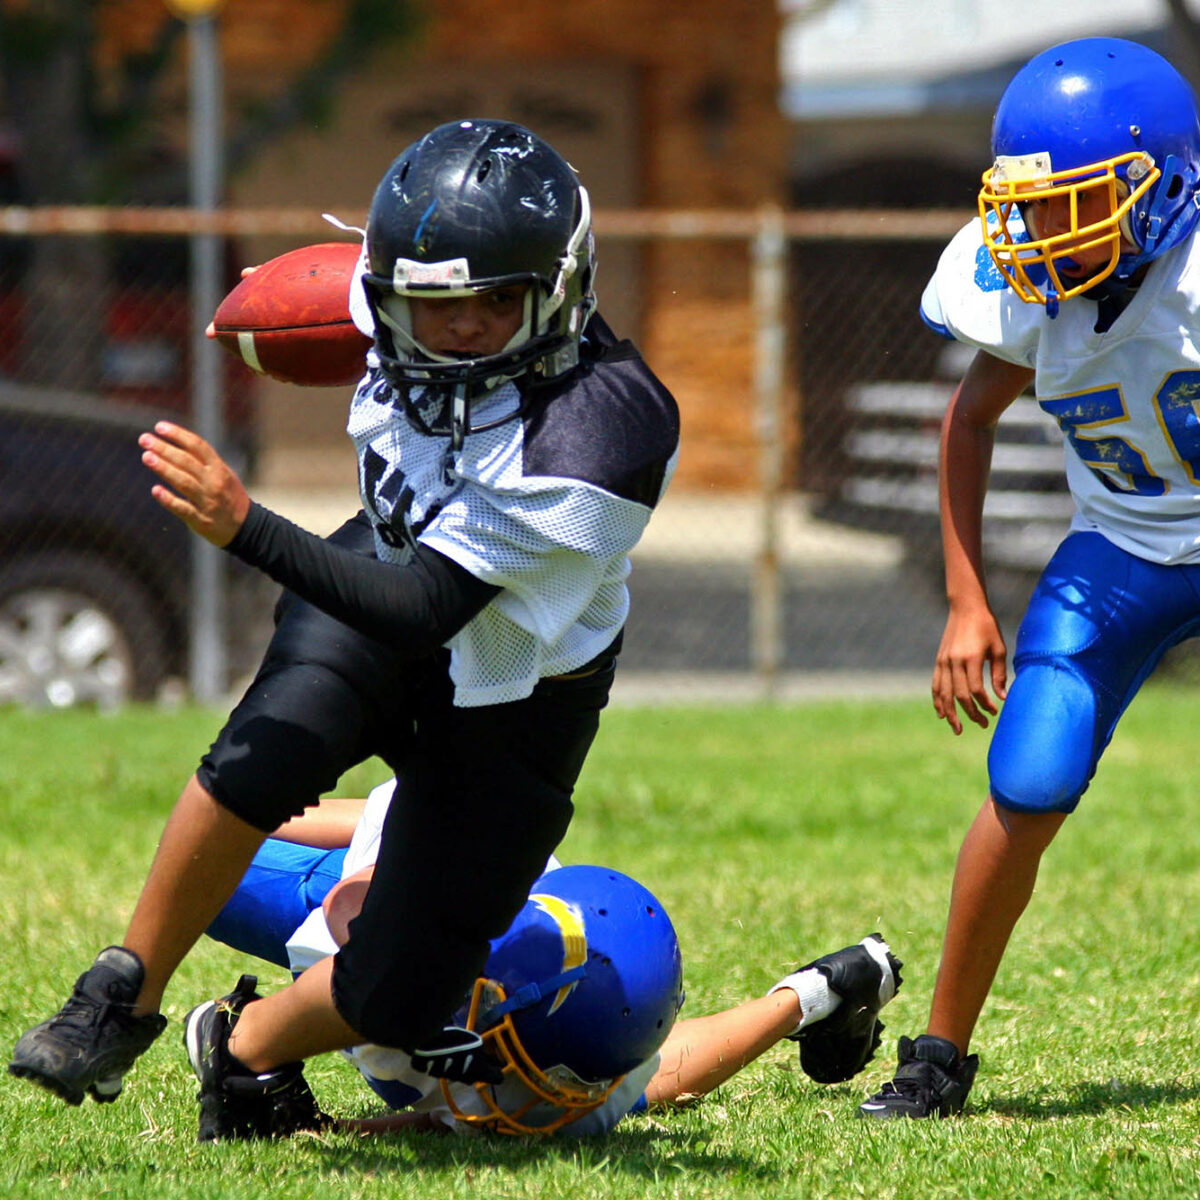 New BU Study Finds Tackle Football at Young Age Raises Risk for Brain  Decline Later, The Brink